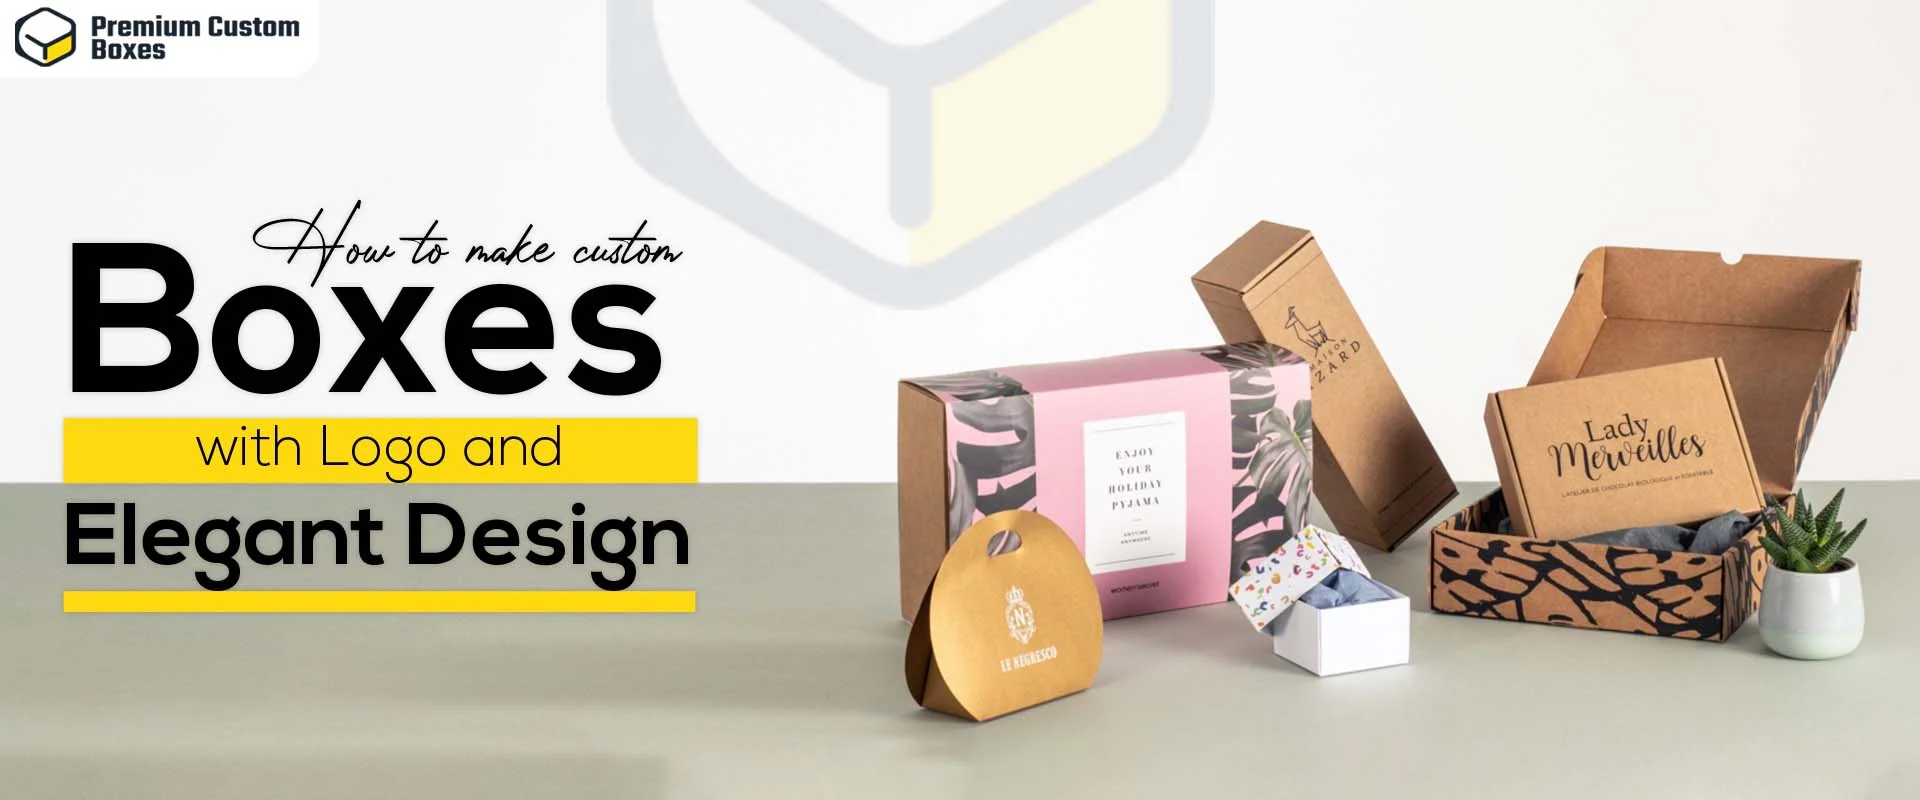 How To Make Custom Boxes With Elegant Designs And Logos